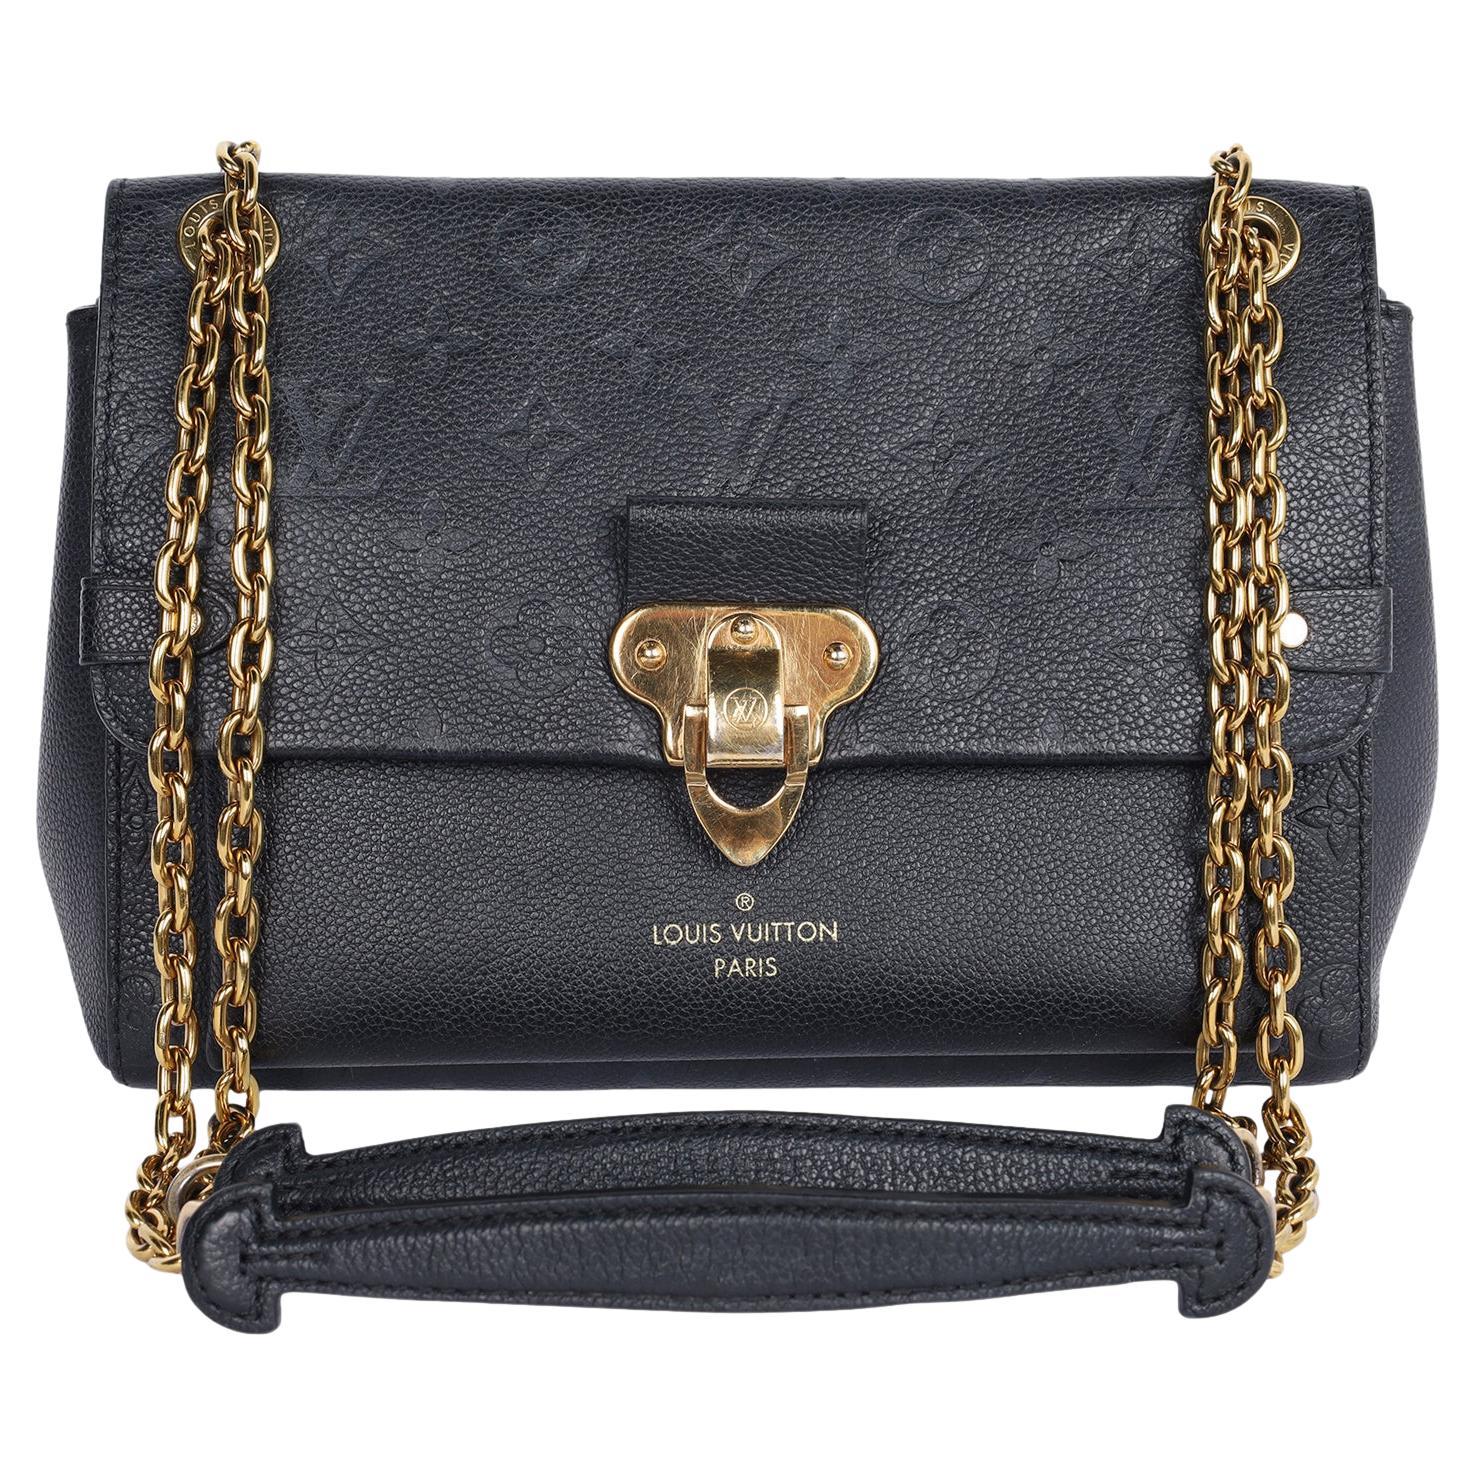 Authentic, pre-loved Louis Vuitton Black Vavin PM in Empreinte Leather. This beautiful front flap style shoulder bag features Louis Vuitton monogram embossed Empriente leather in black, brass hardware, bijoux chain link and leather strap, magnetic